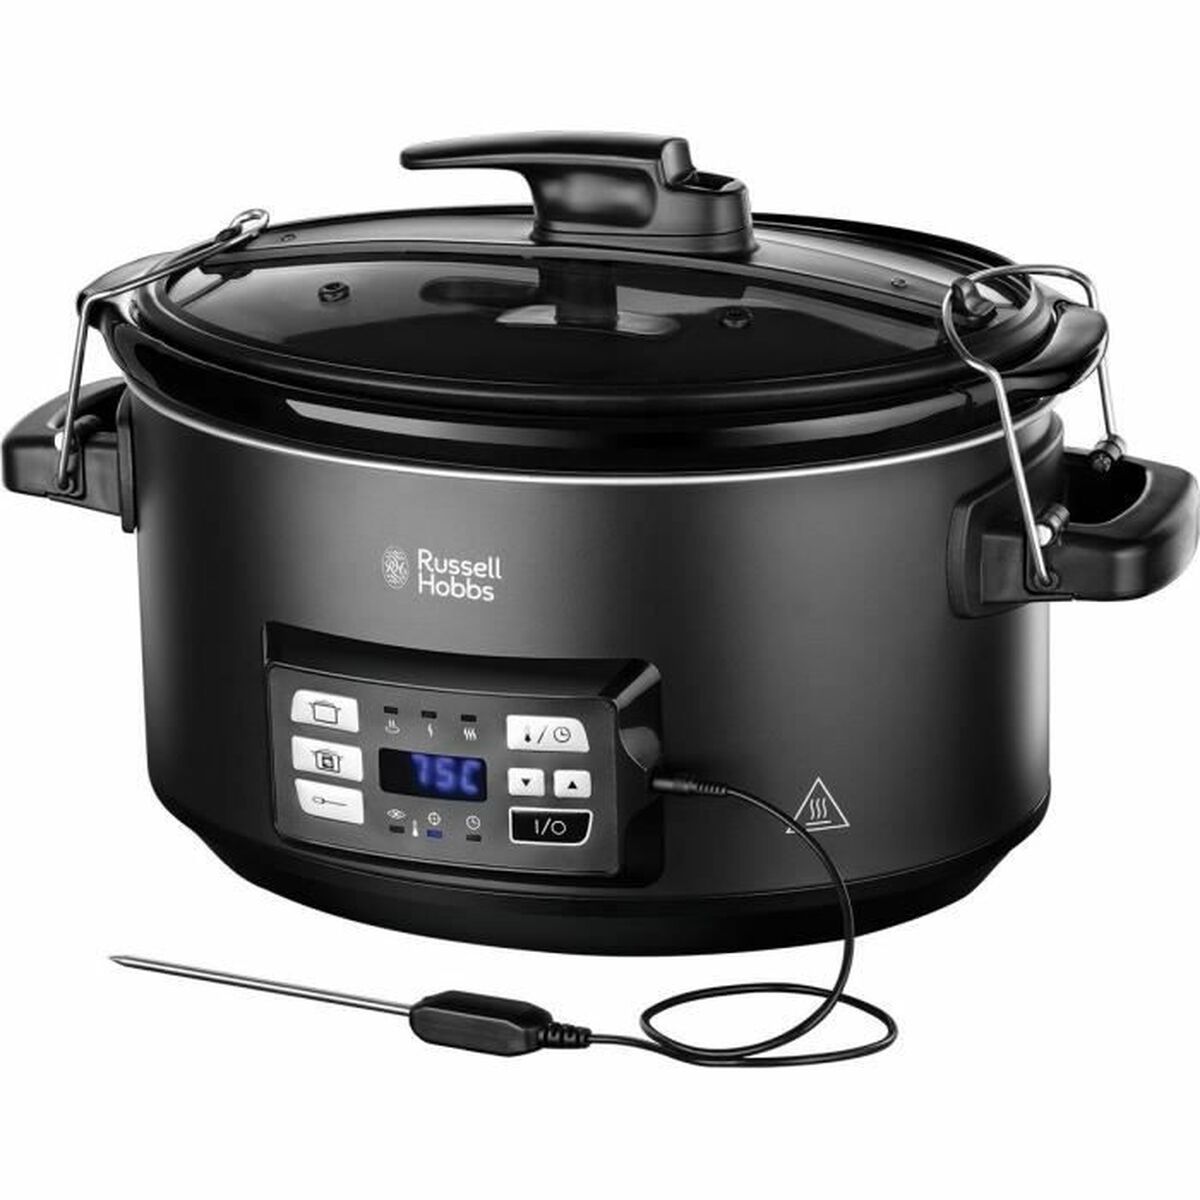 Slow cooker Russell Hobbs 25630-56 220 V 6,5 L 350 W 3-i-1